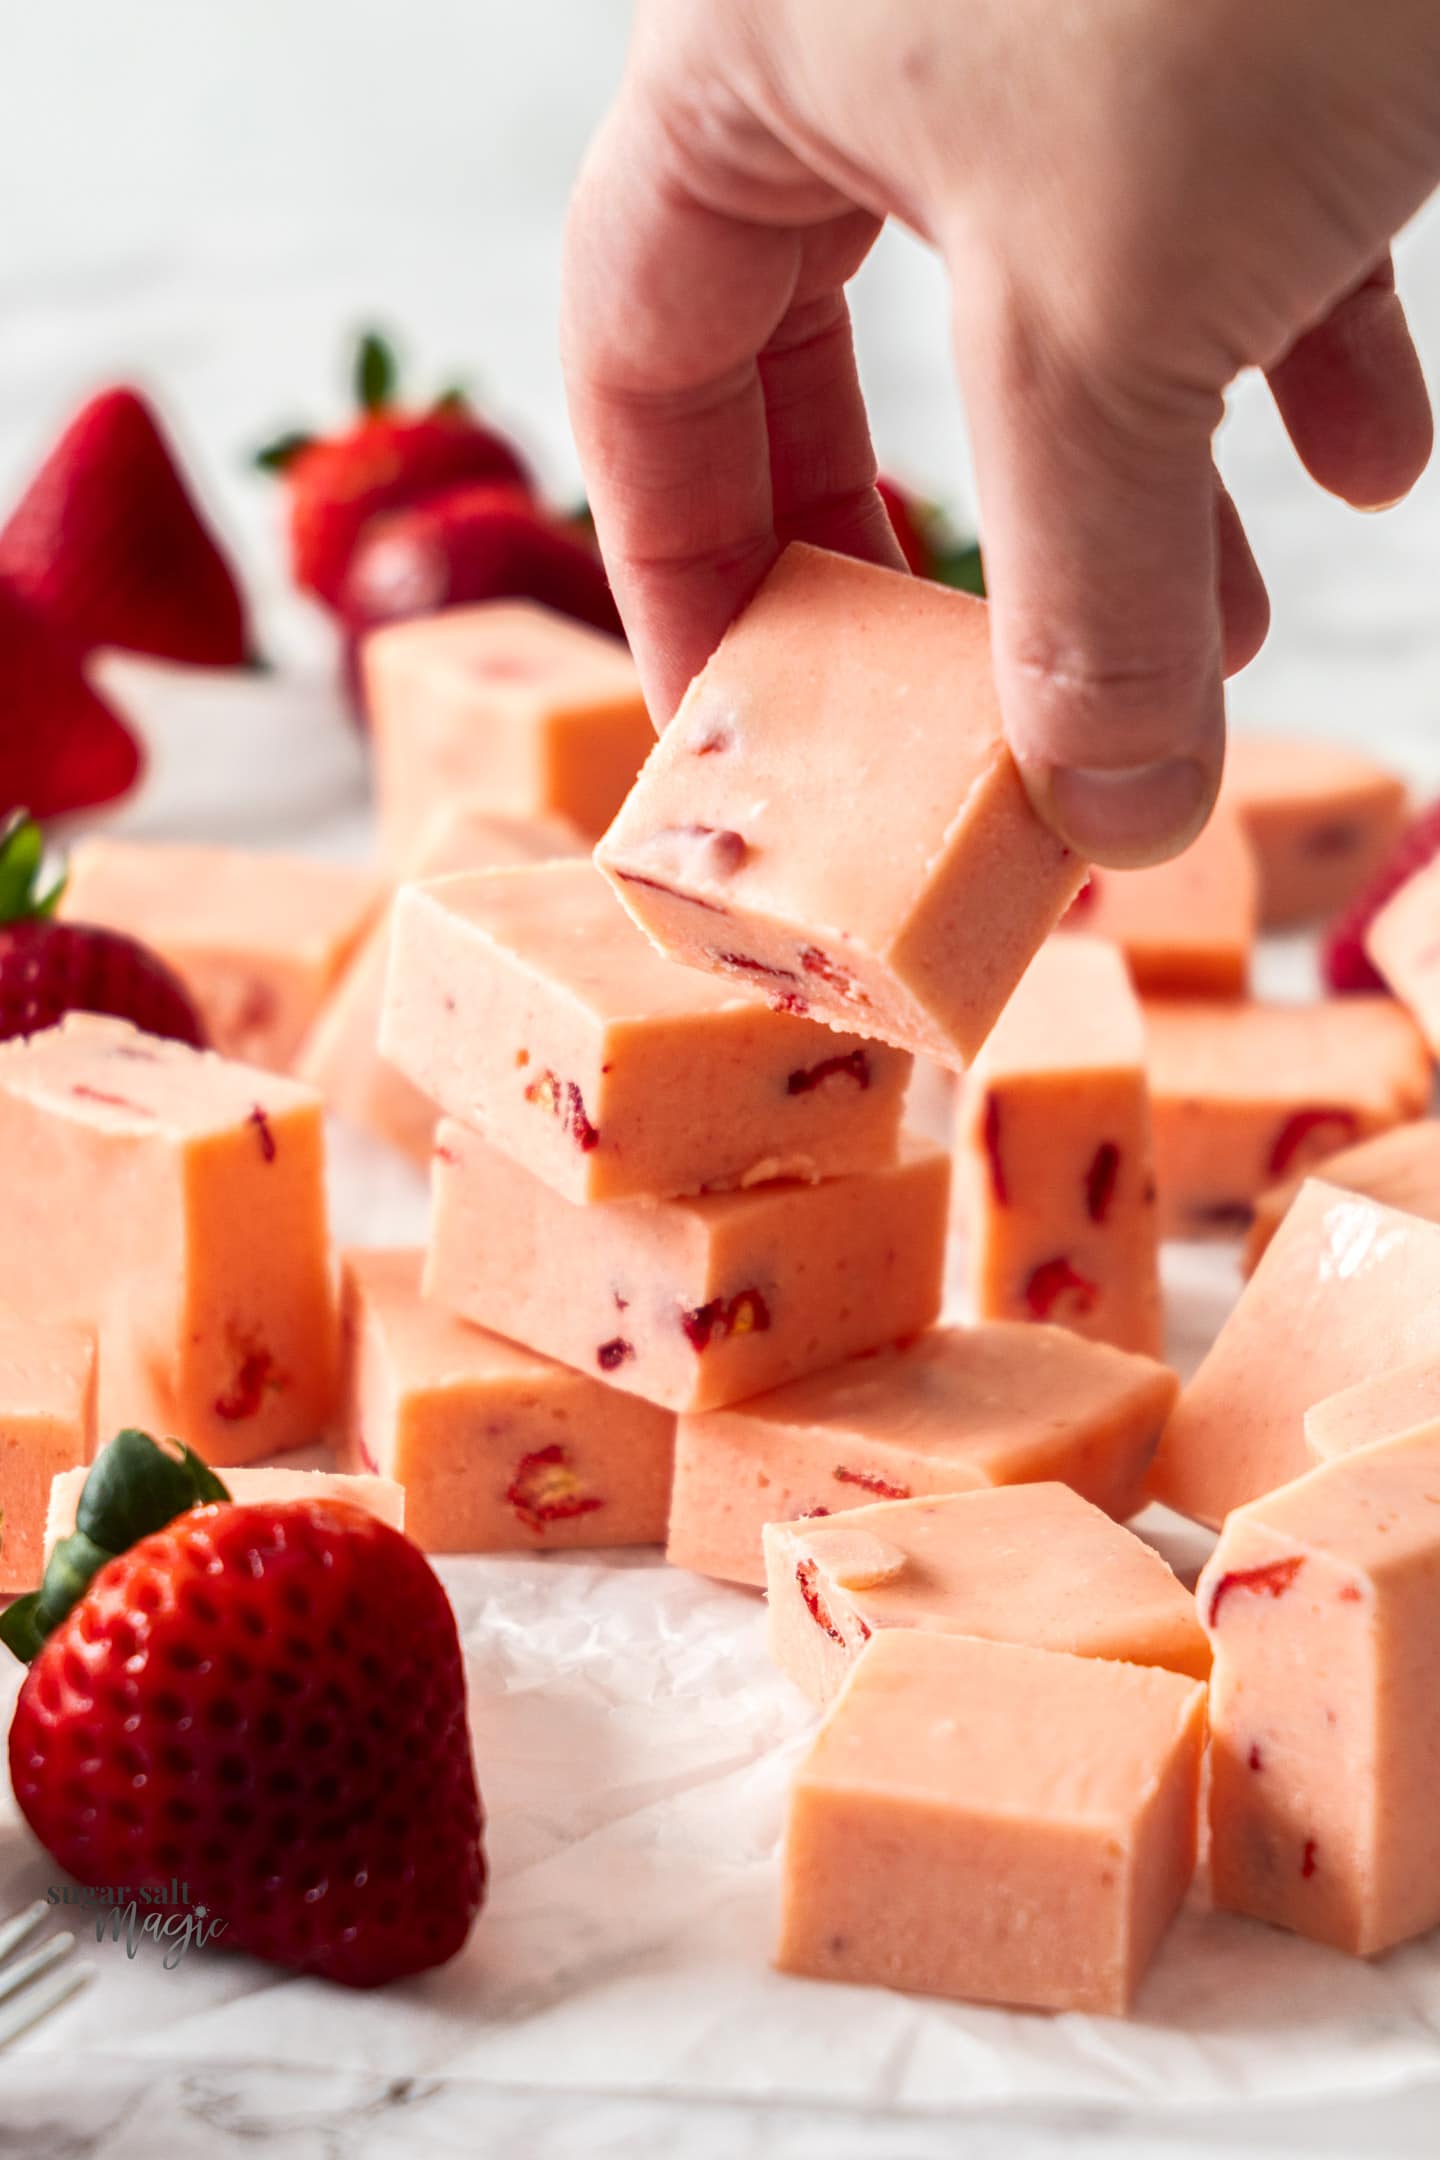 A hand picking up a piece of strawberry fudge.